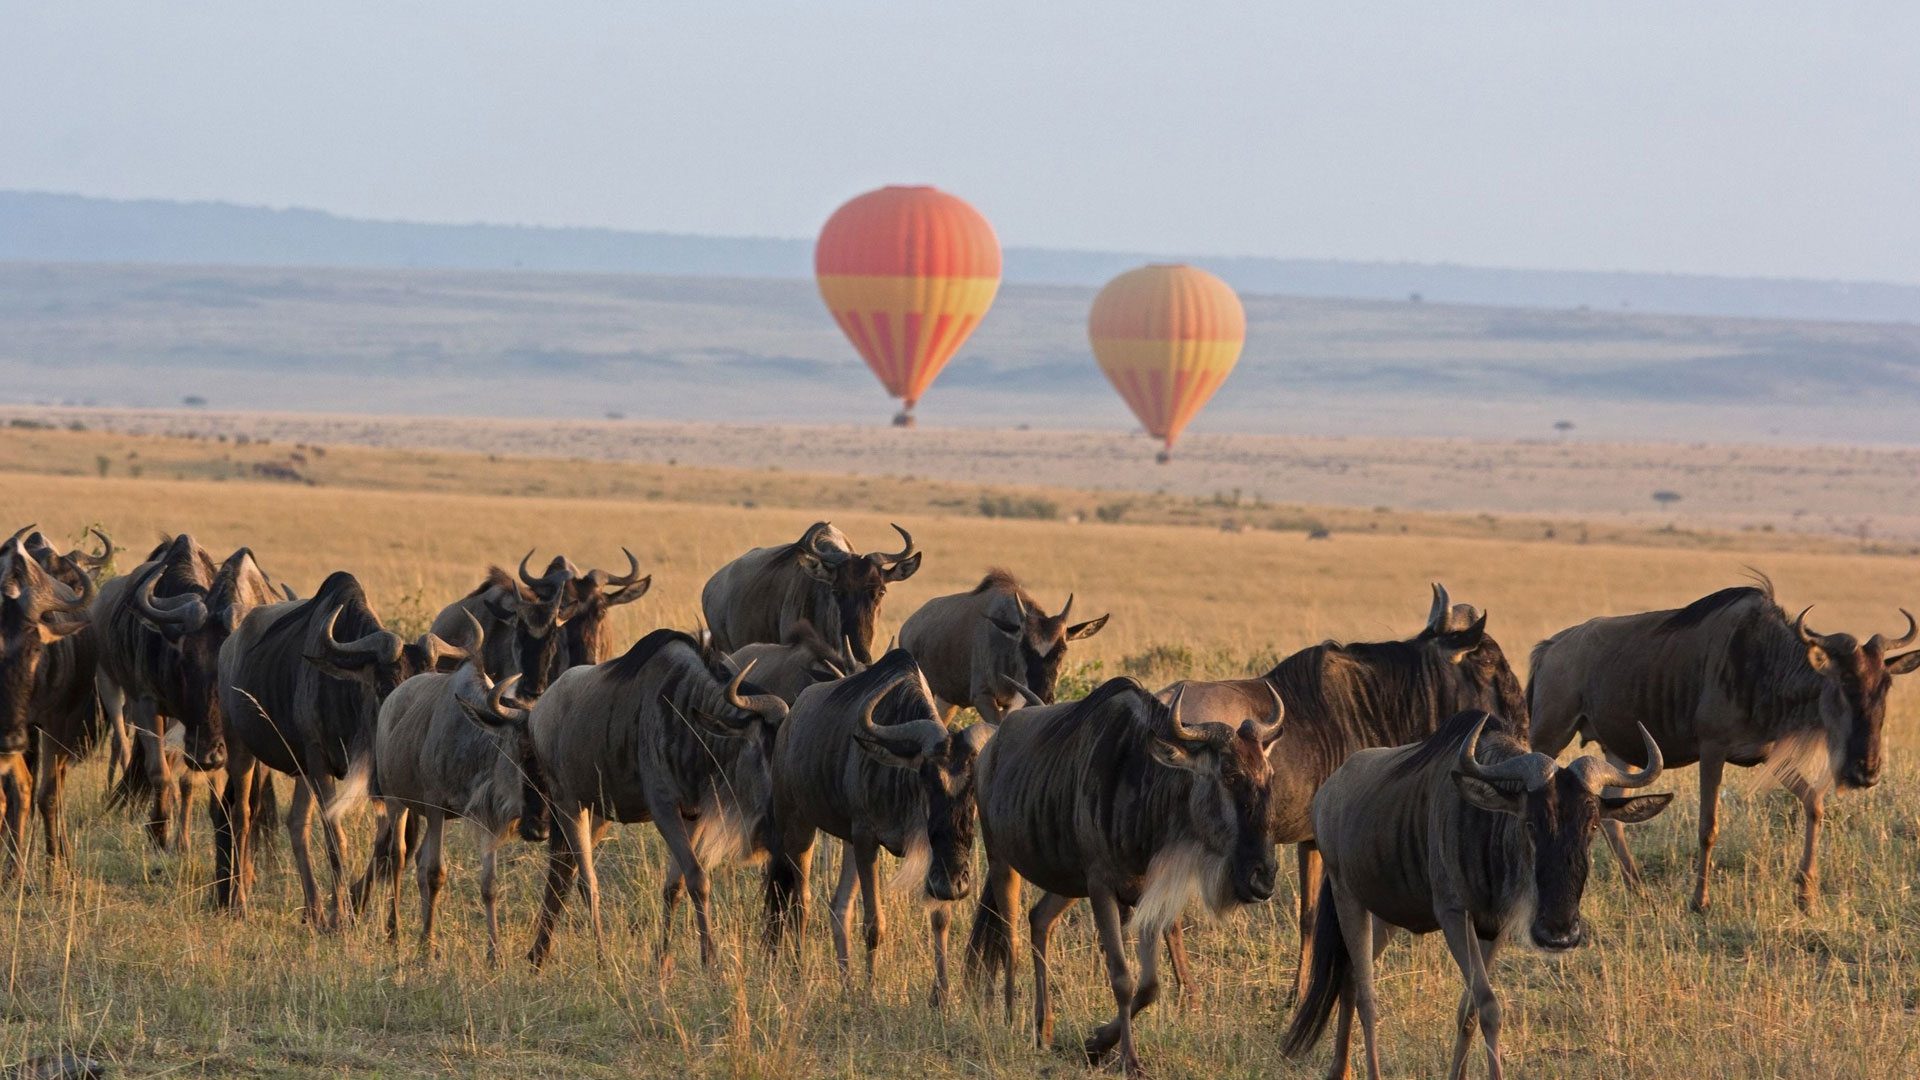 The Great Wildebeest Migration: 3 Tips to Know Before You Go, Wildebeest with Hot Air Balloons